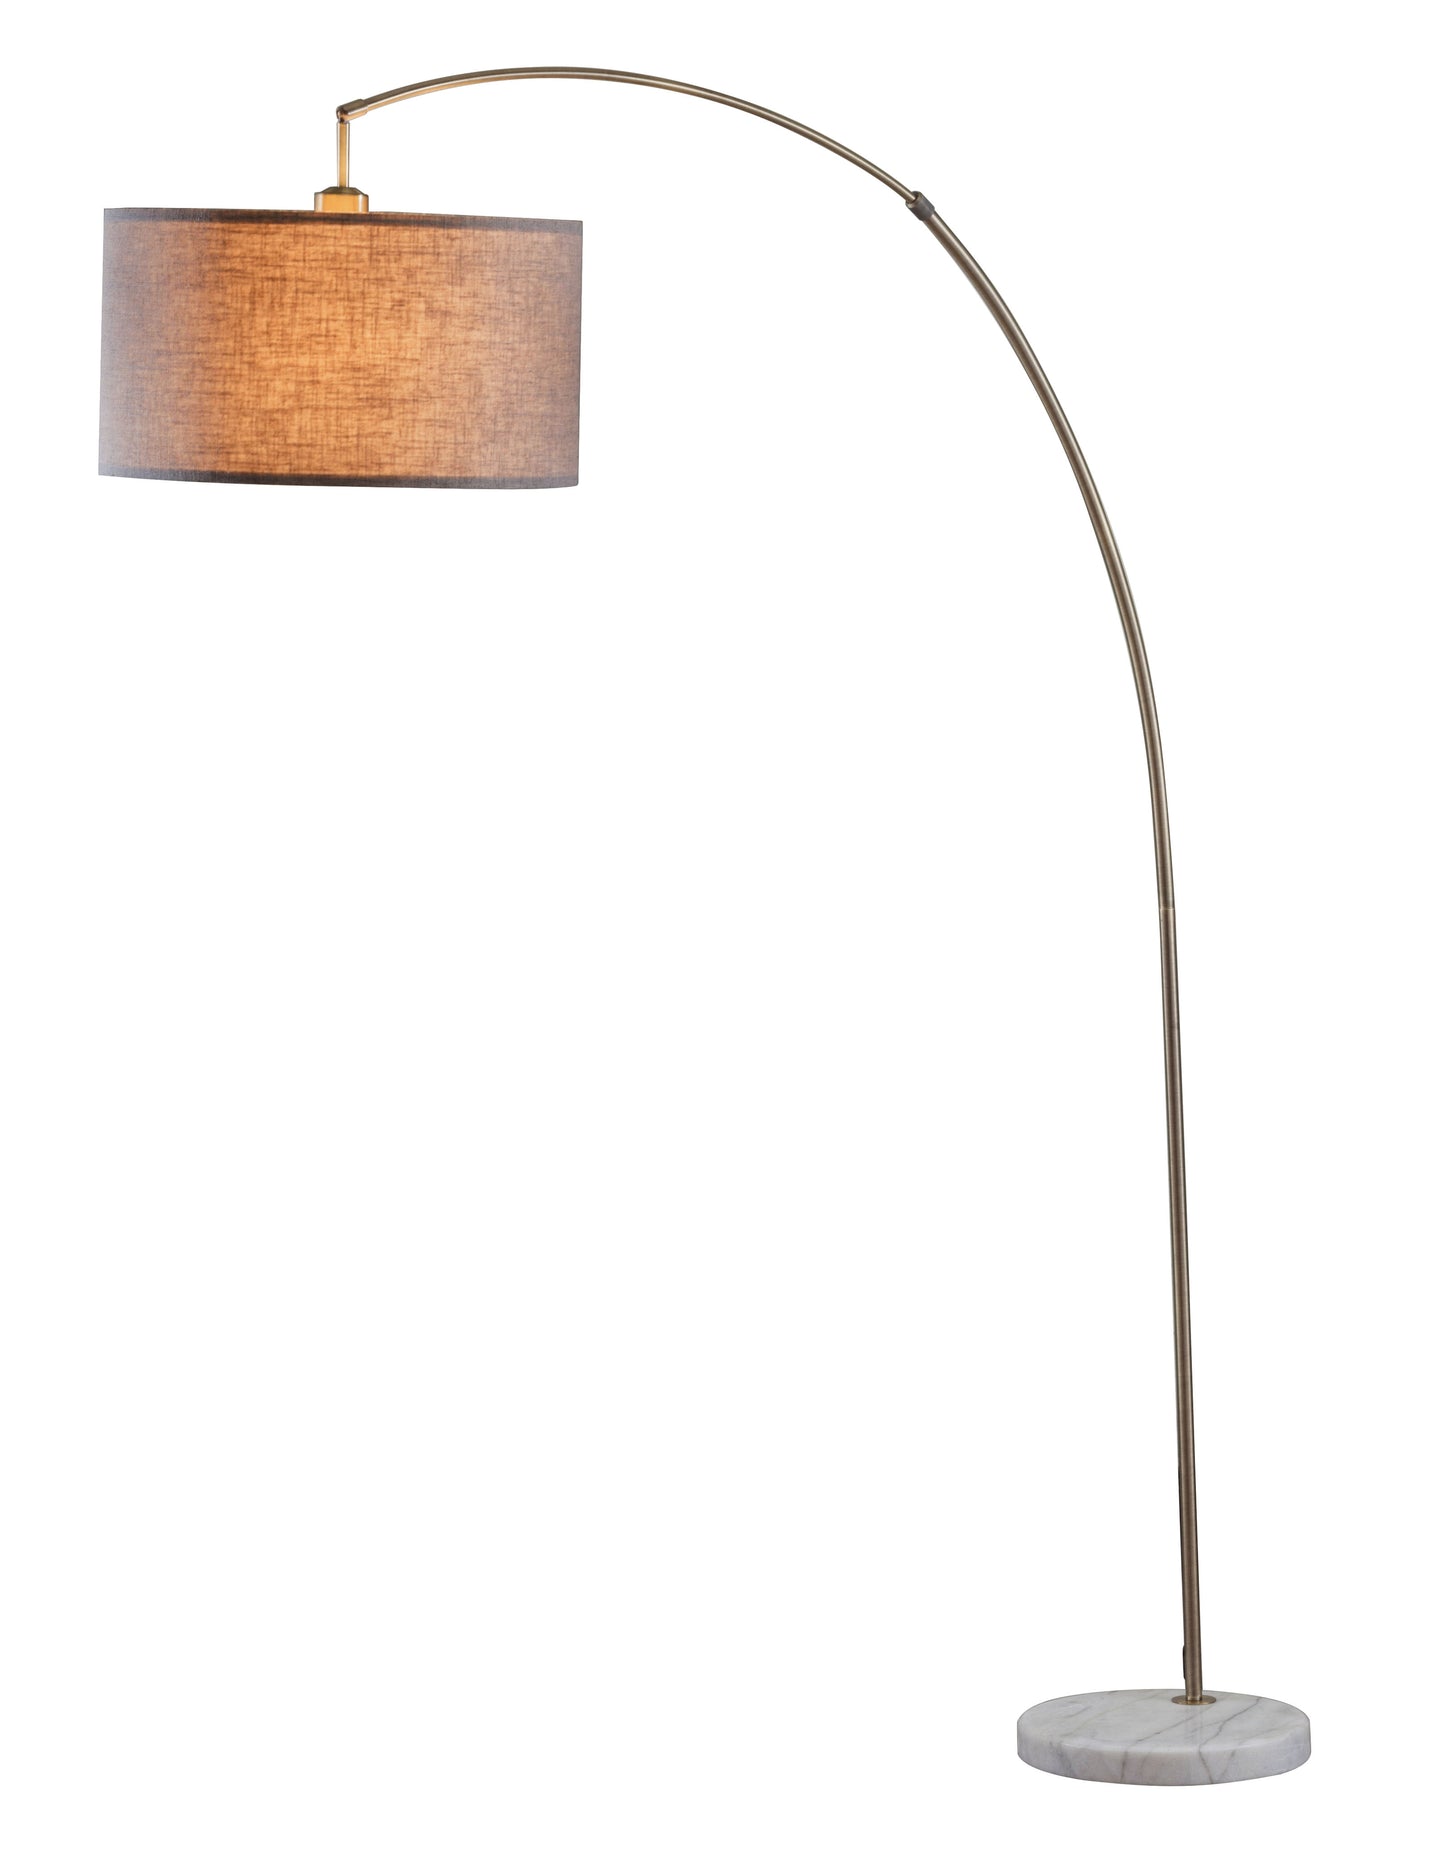 Cagney Antique Brass & Marble Floor Lamp